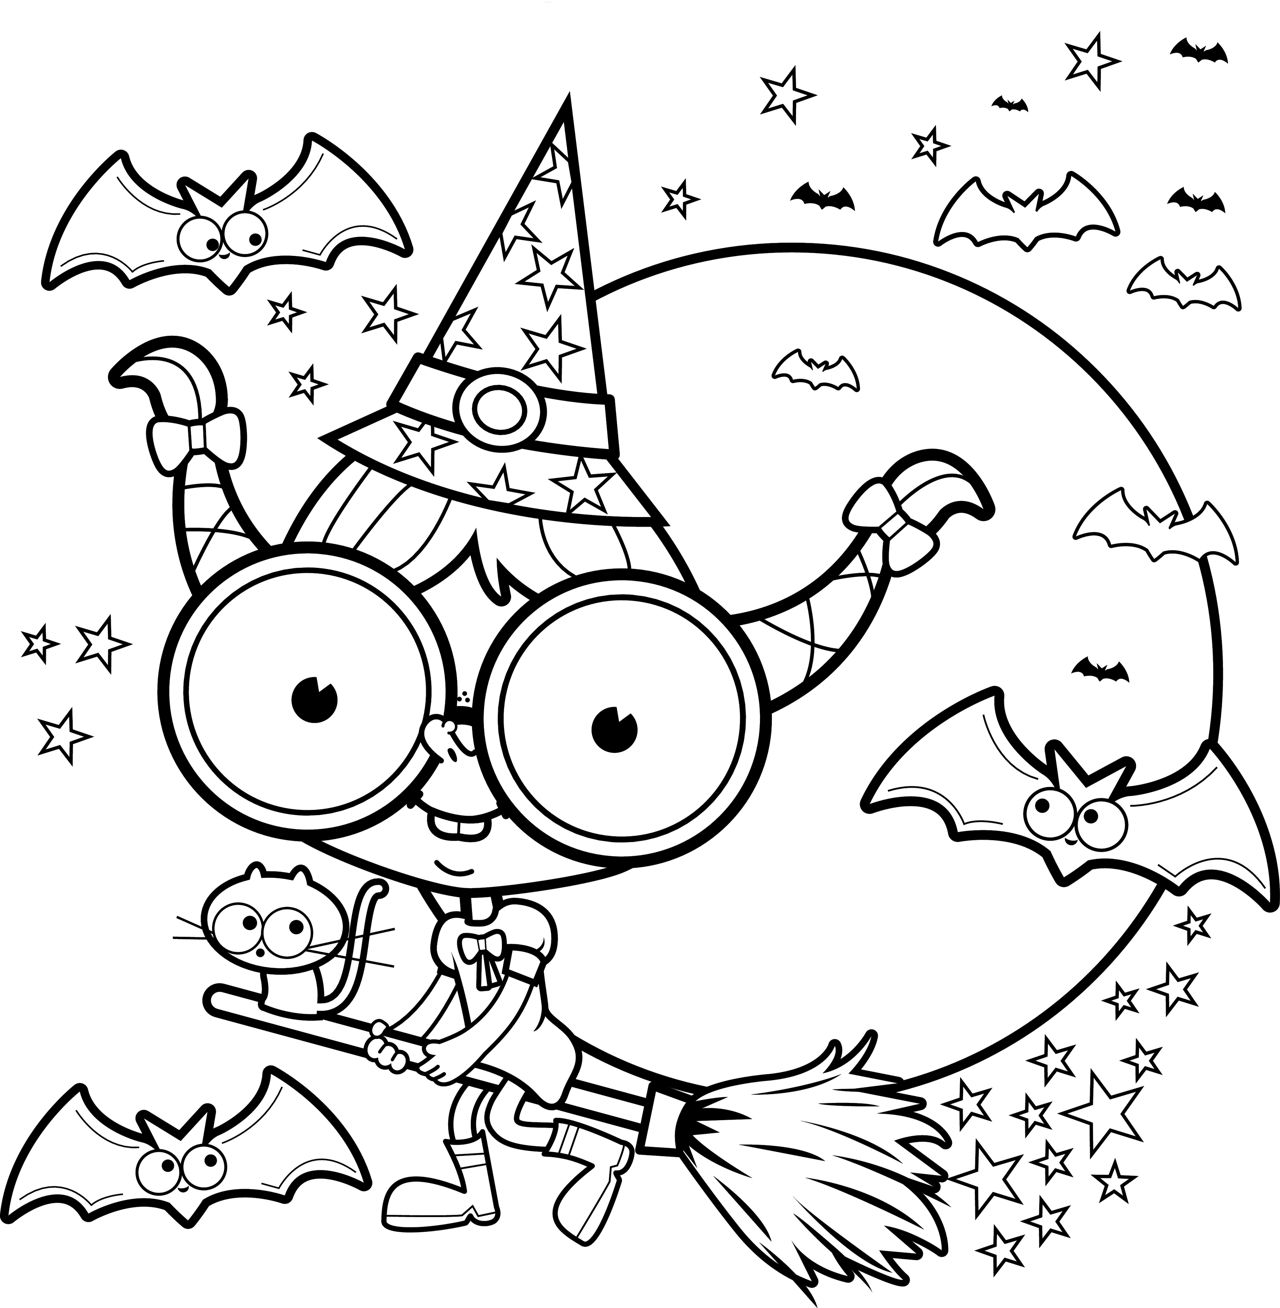 Download Free Printable Halloween Coloring Pages for Kids - Celebration Joy